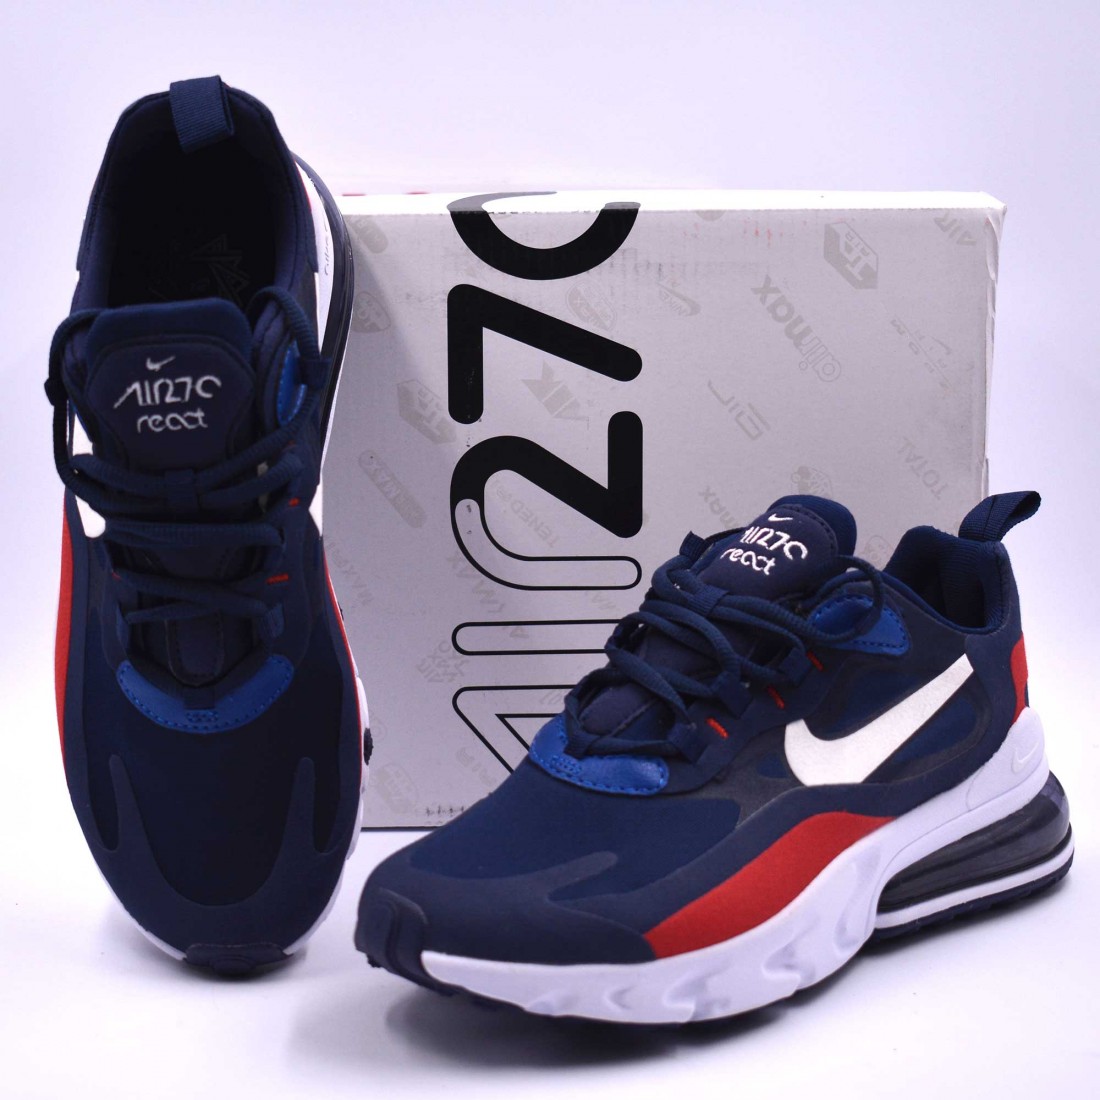 Type Attendsle Concession Air Max 270 React Navy Blue Sudest Sourire Chaque Annee